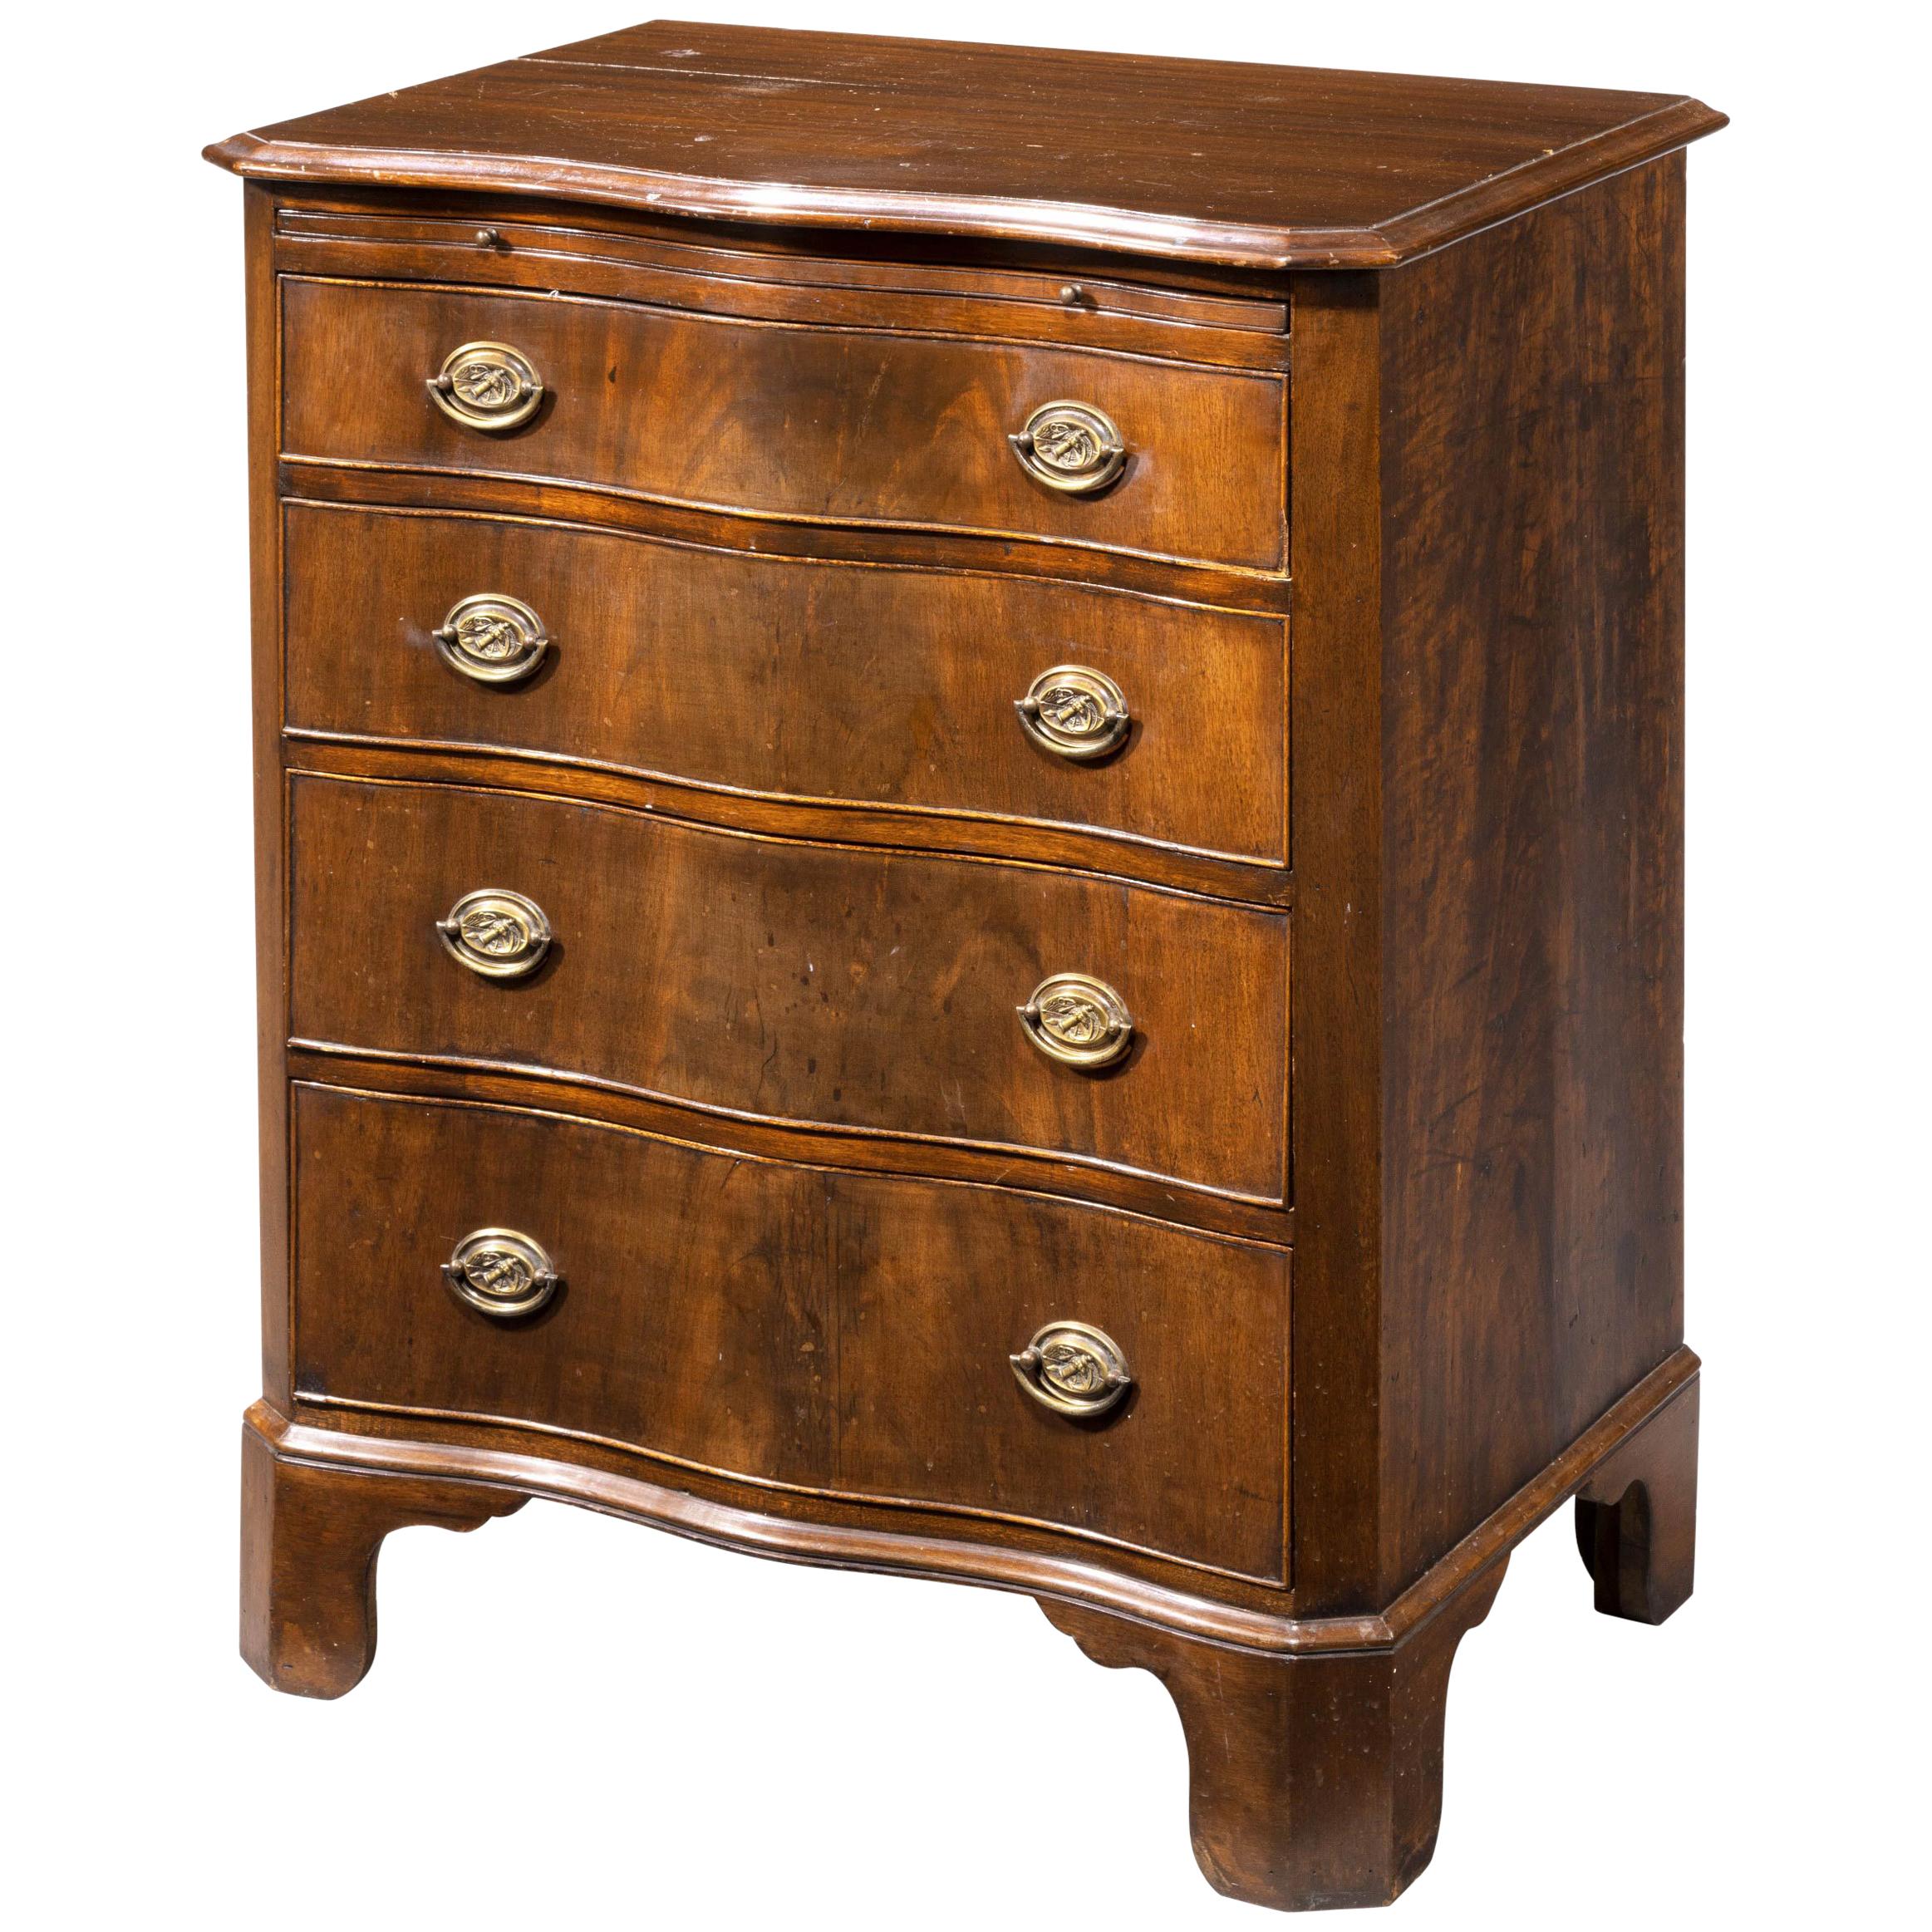 Small Early 20th Century Mahogany Serpentine Chest of Drawers